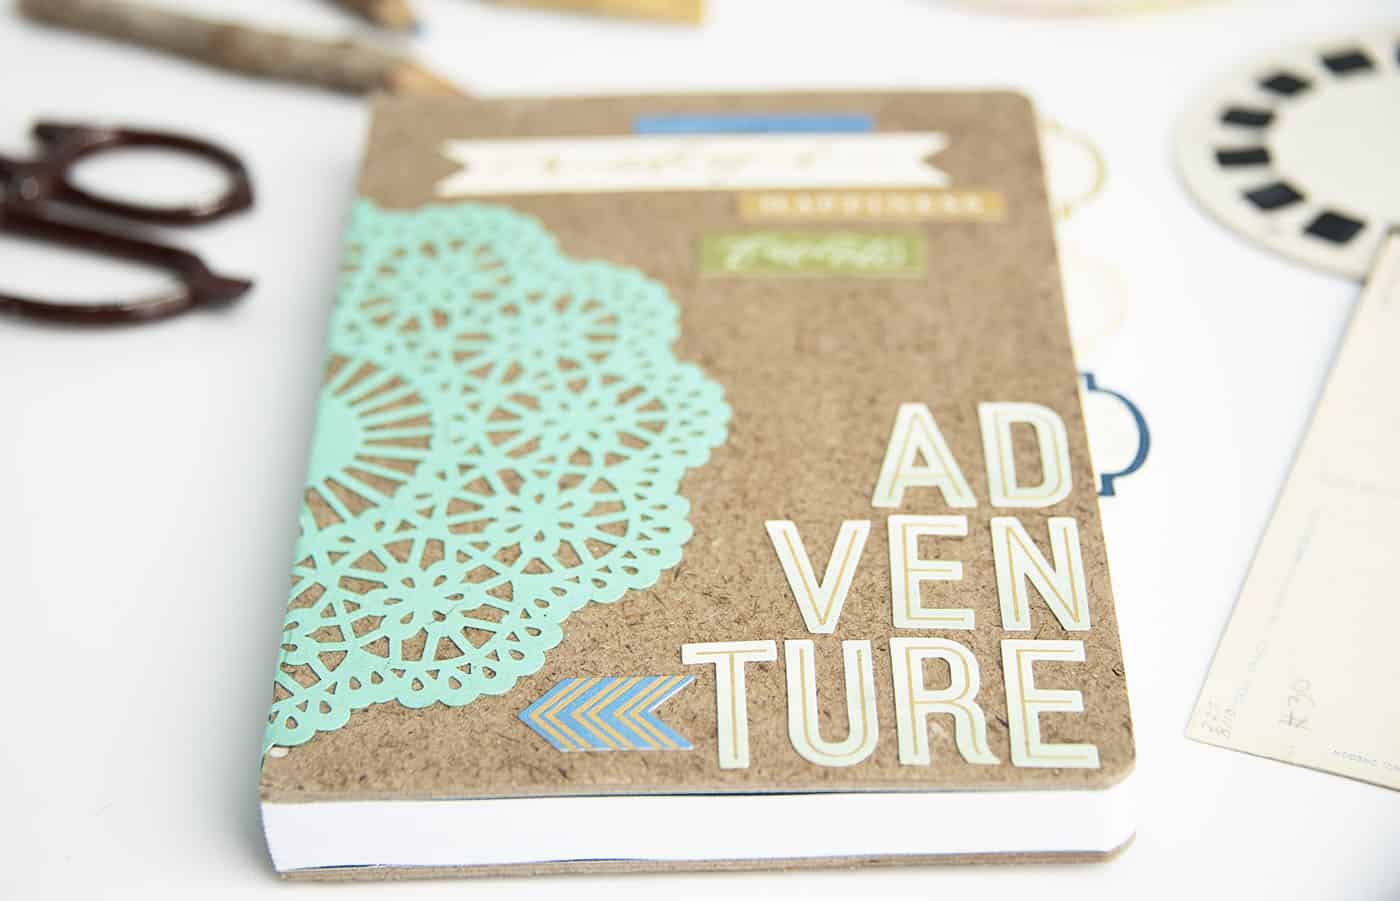 Image of a notebook decorated with cut-out patterns and the word "Adventure".